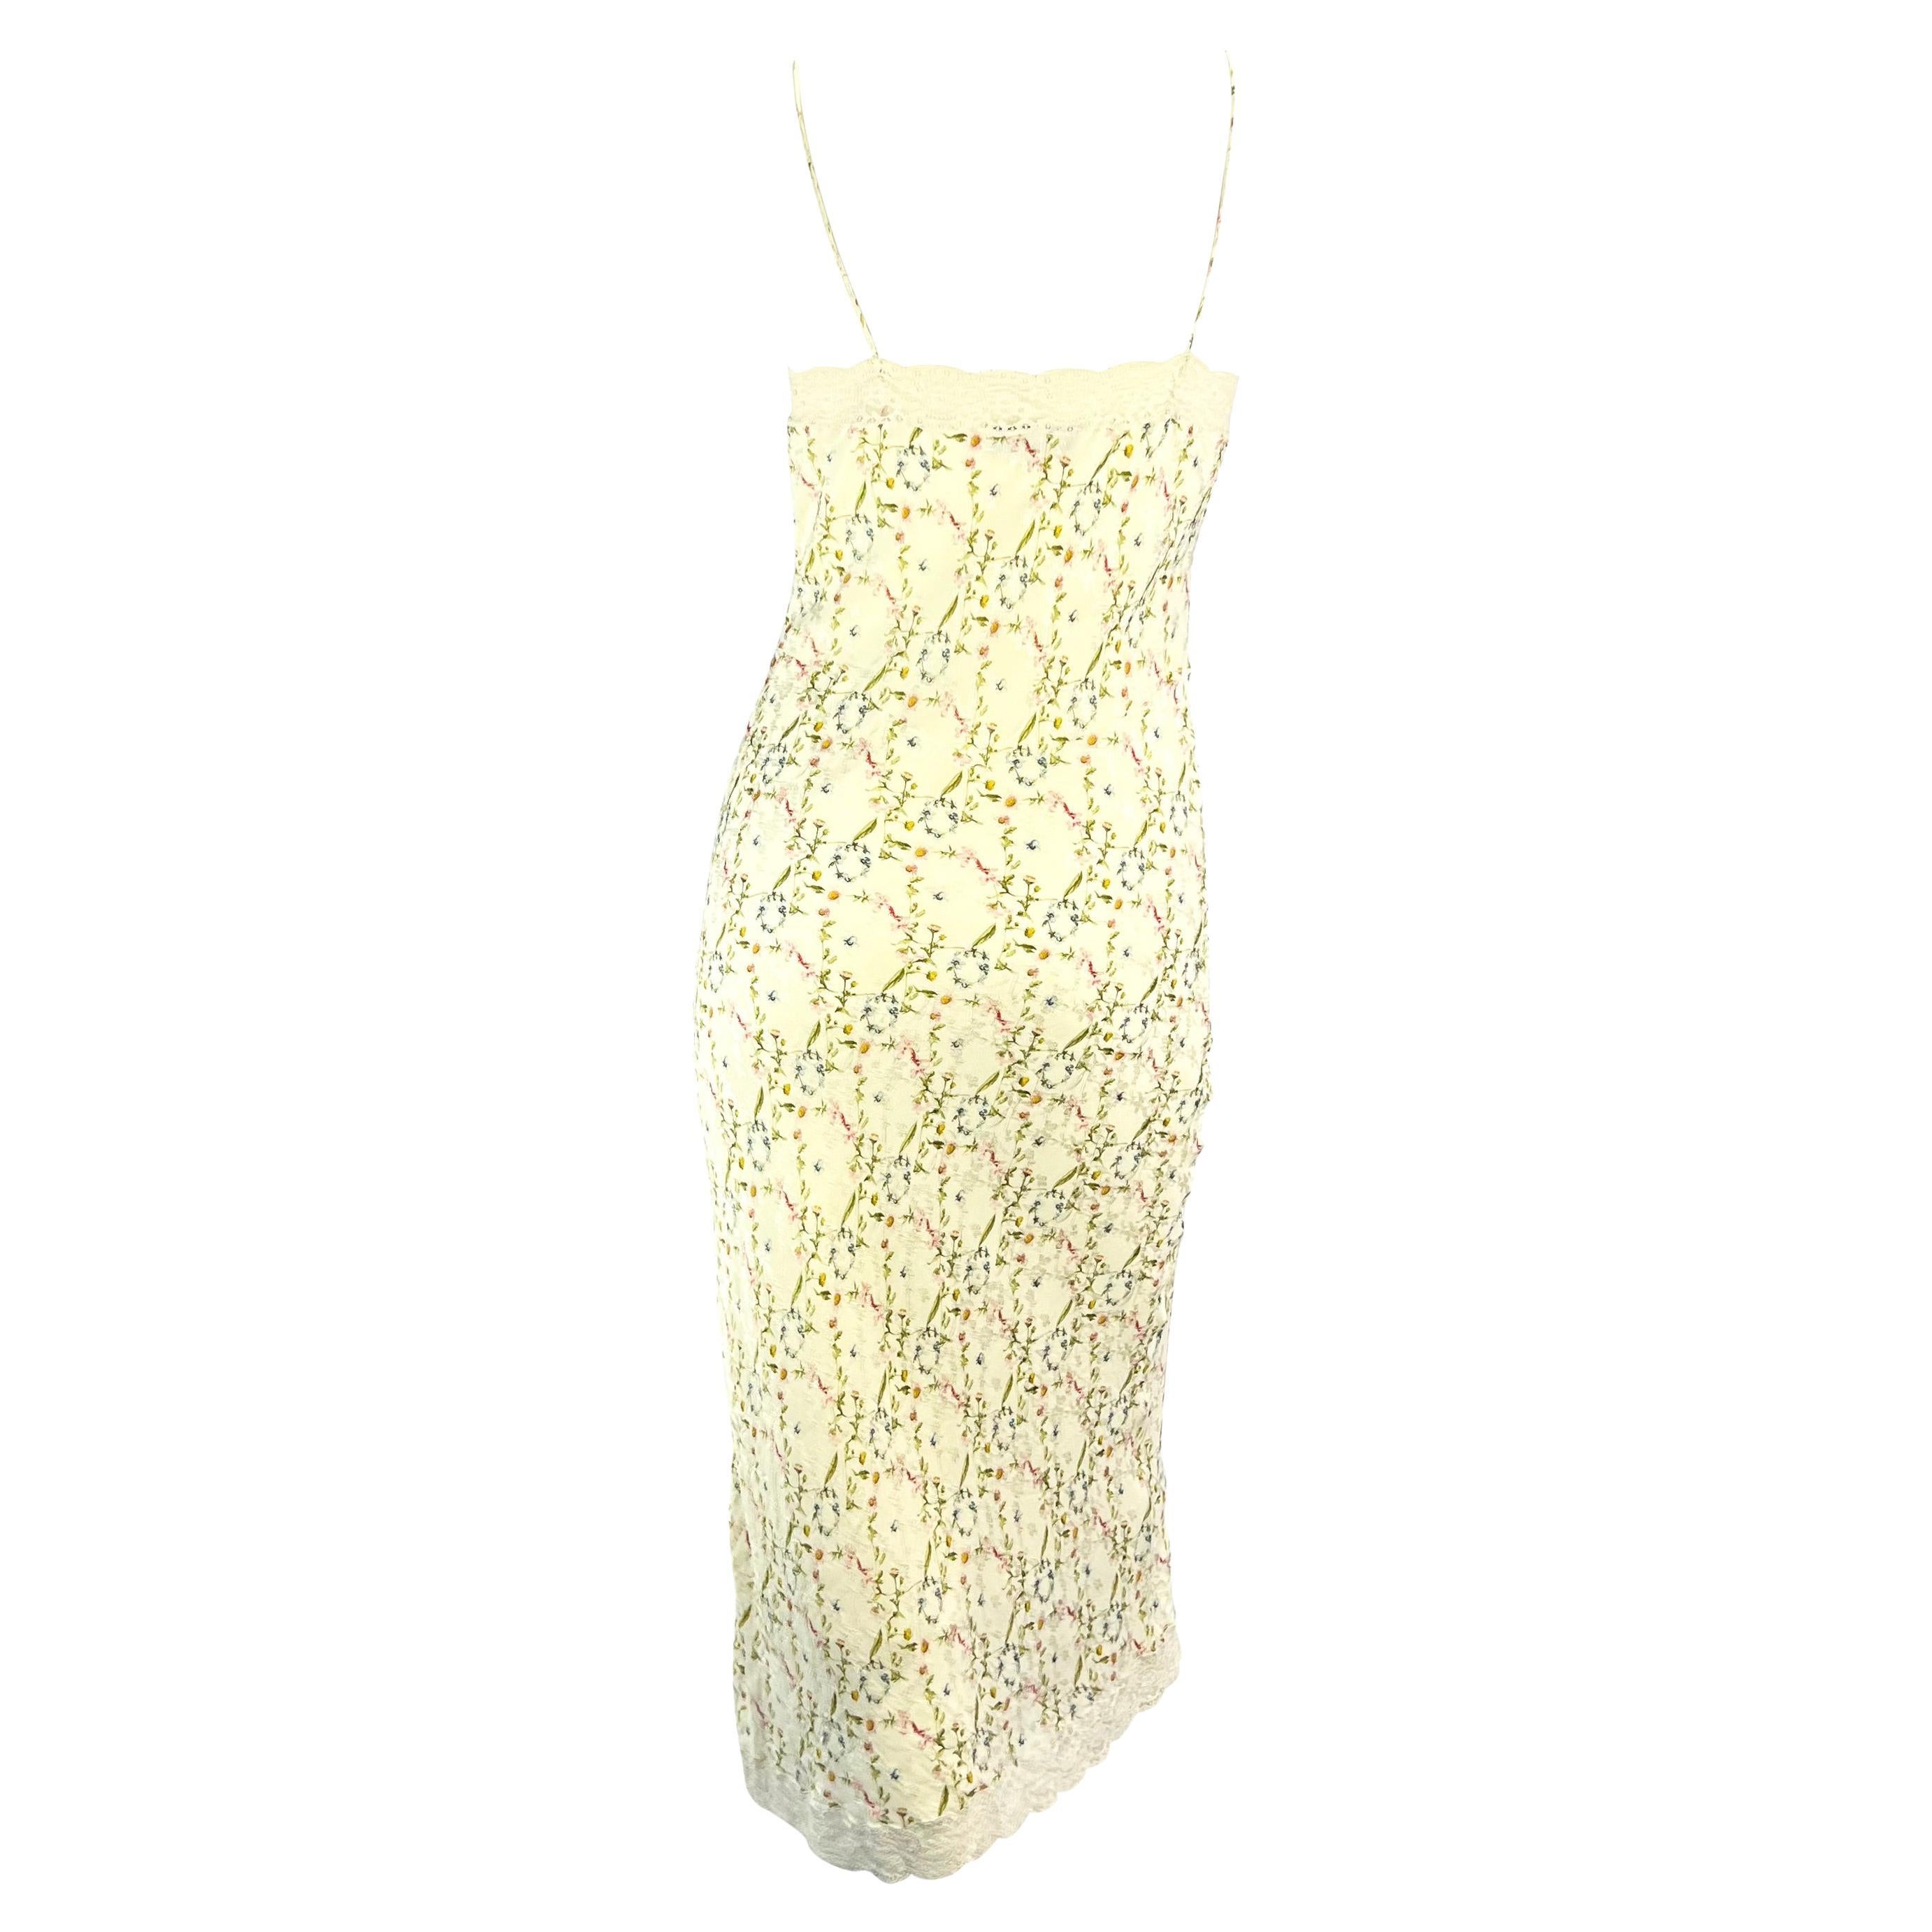 S/S 2005 Christian Dior by John Galliano Floral Diorissimo Lace Slip Dress 1